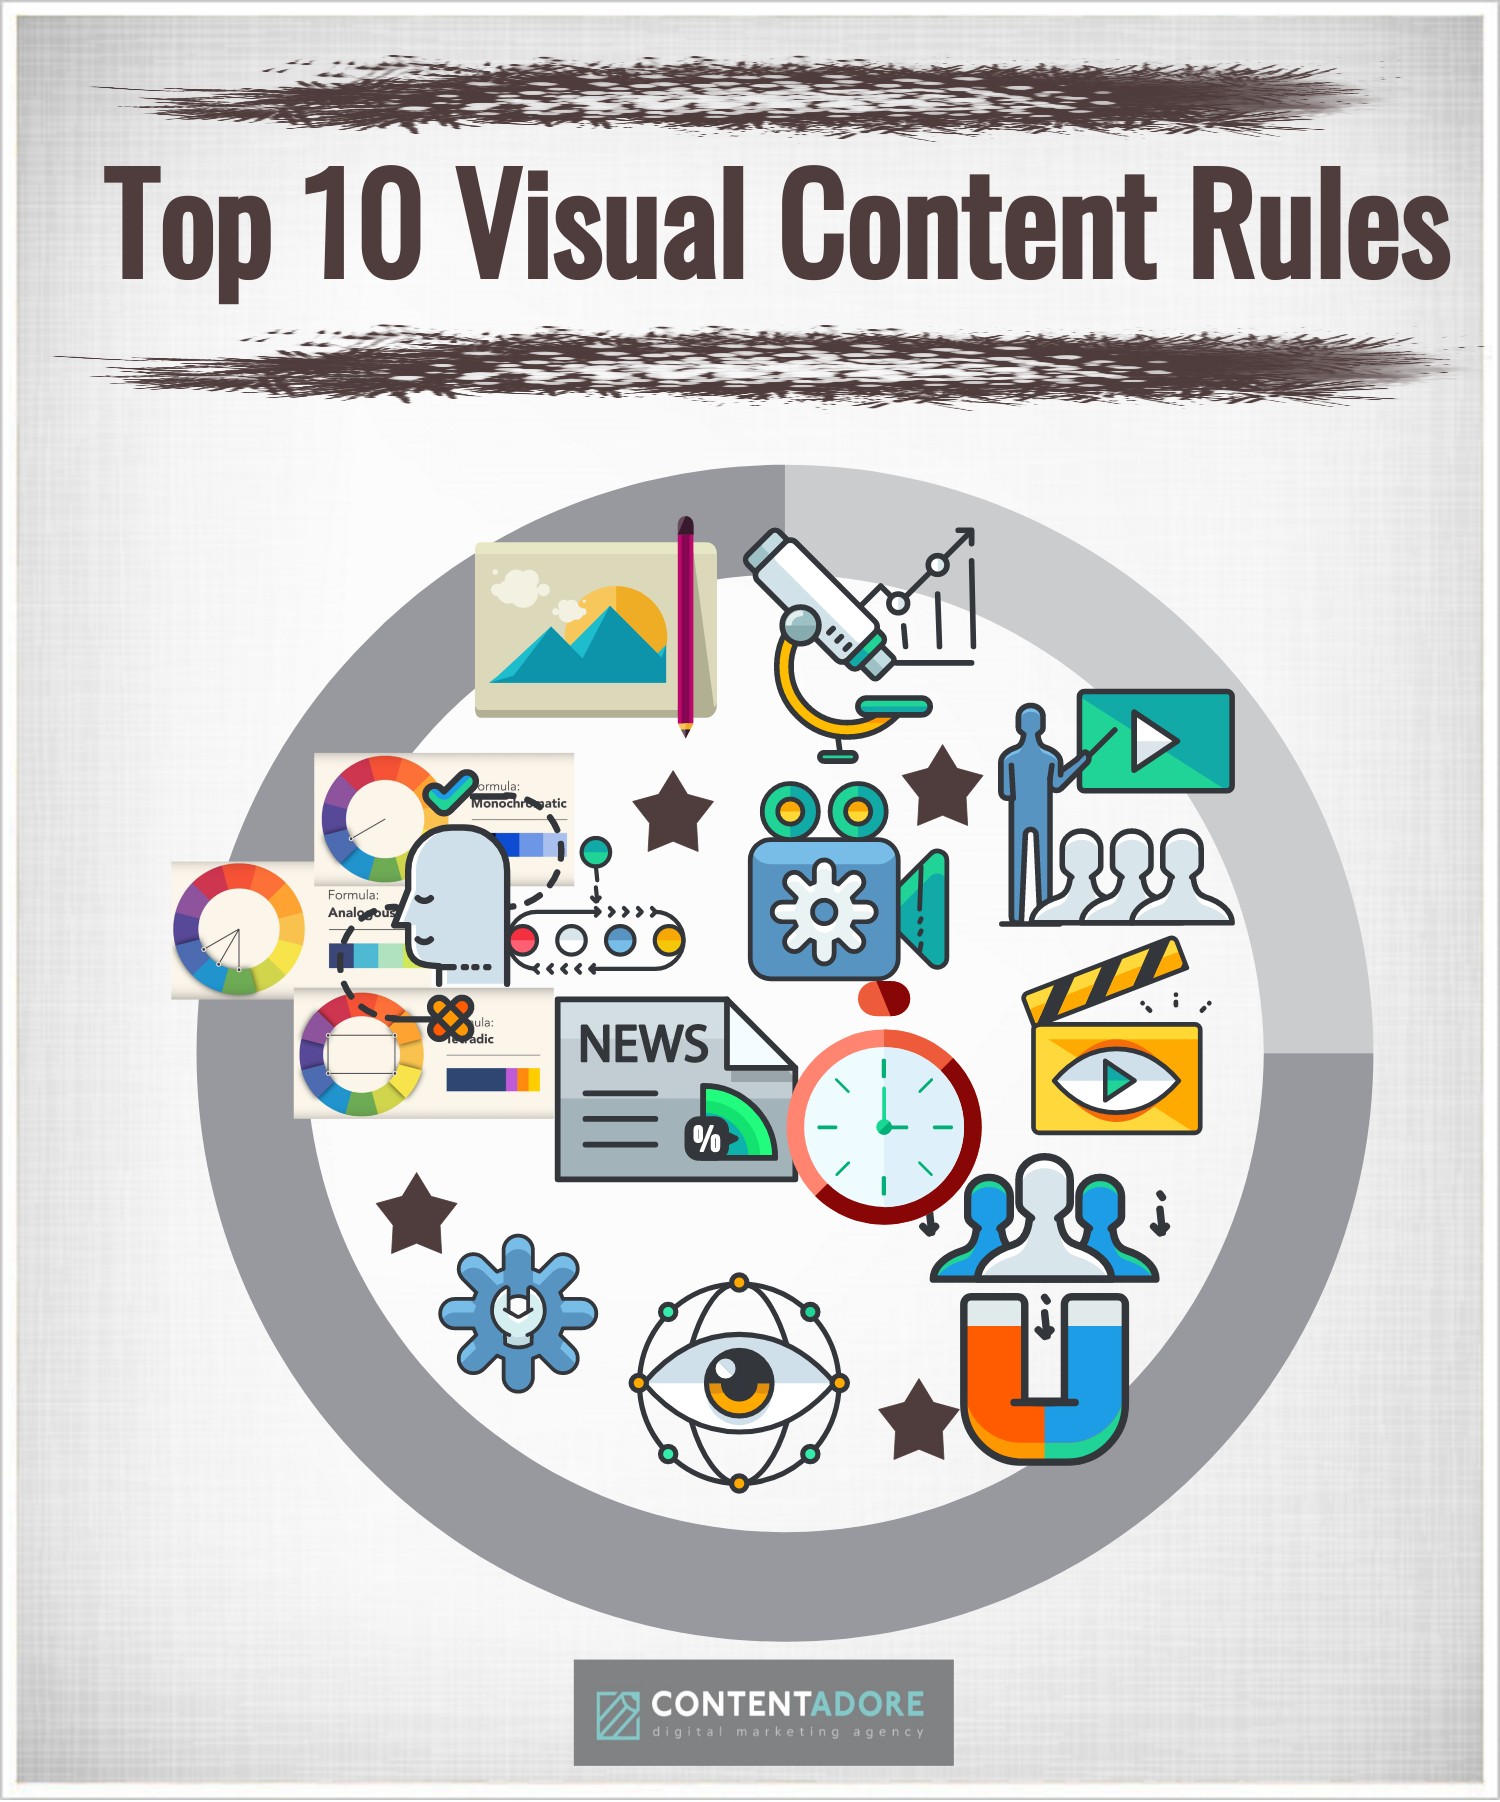 Top 10 Visual Content Rules